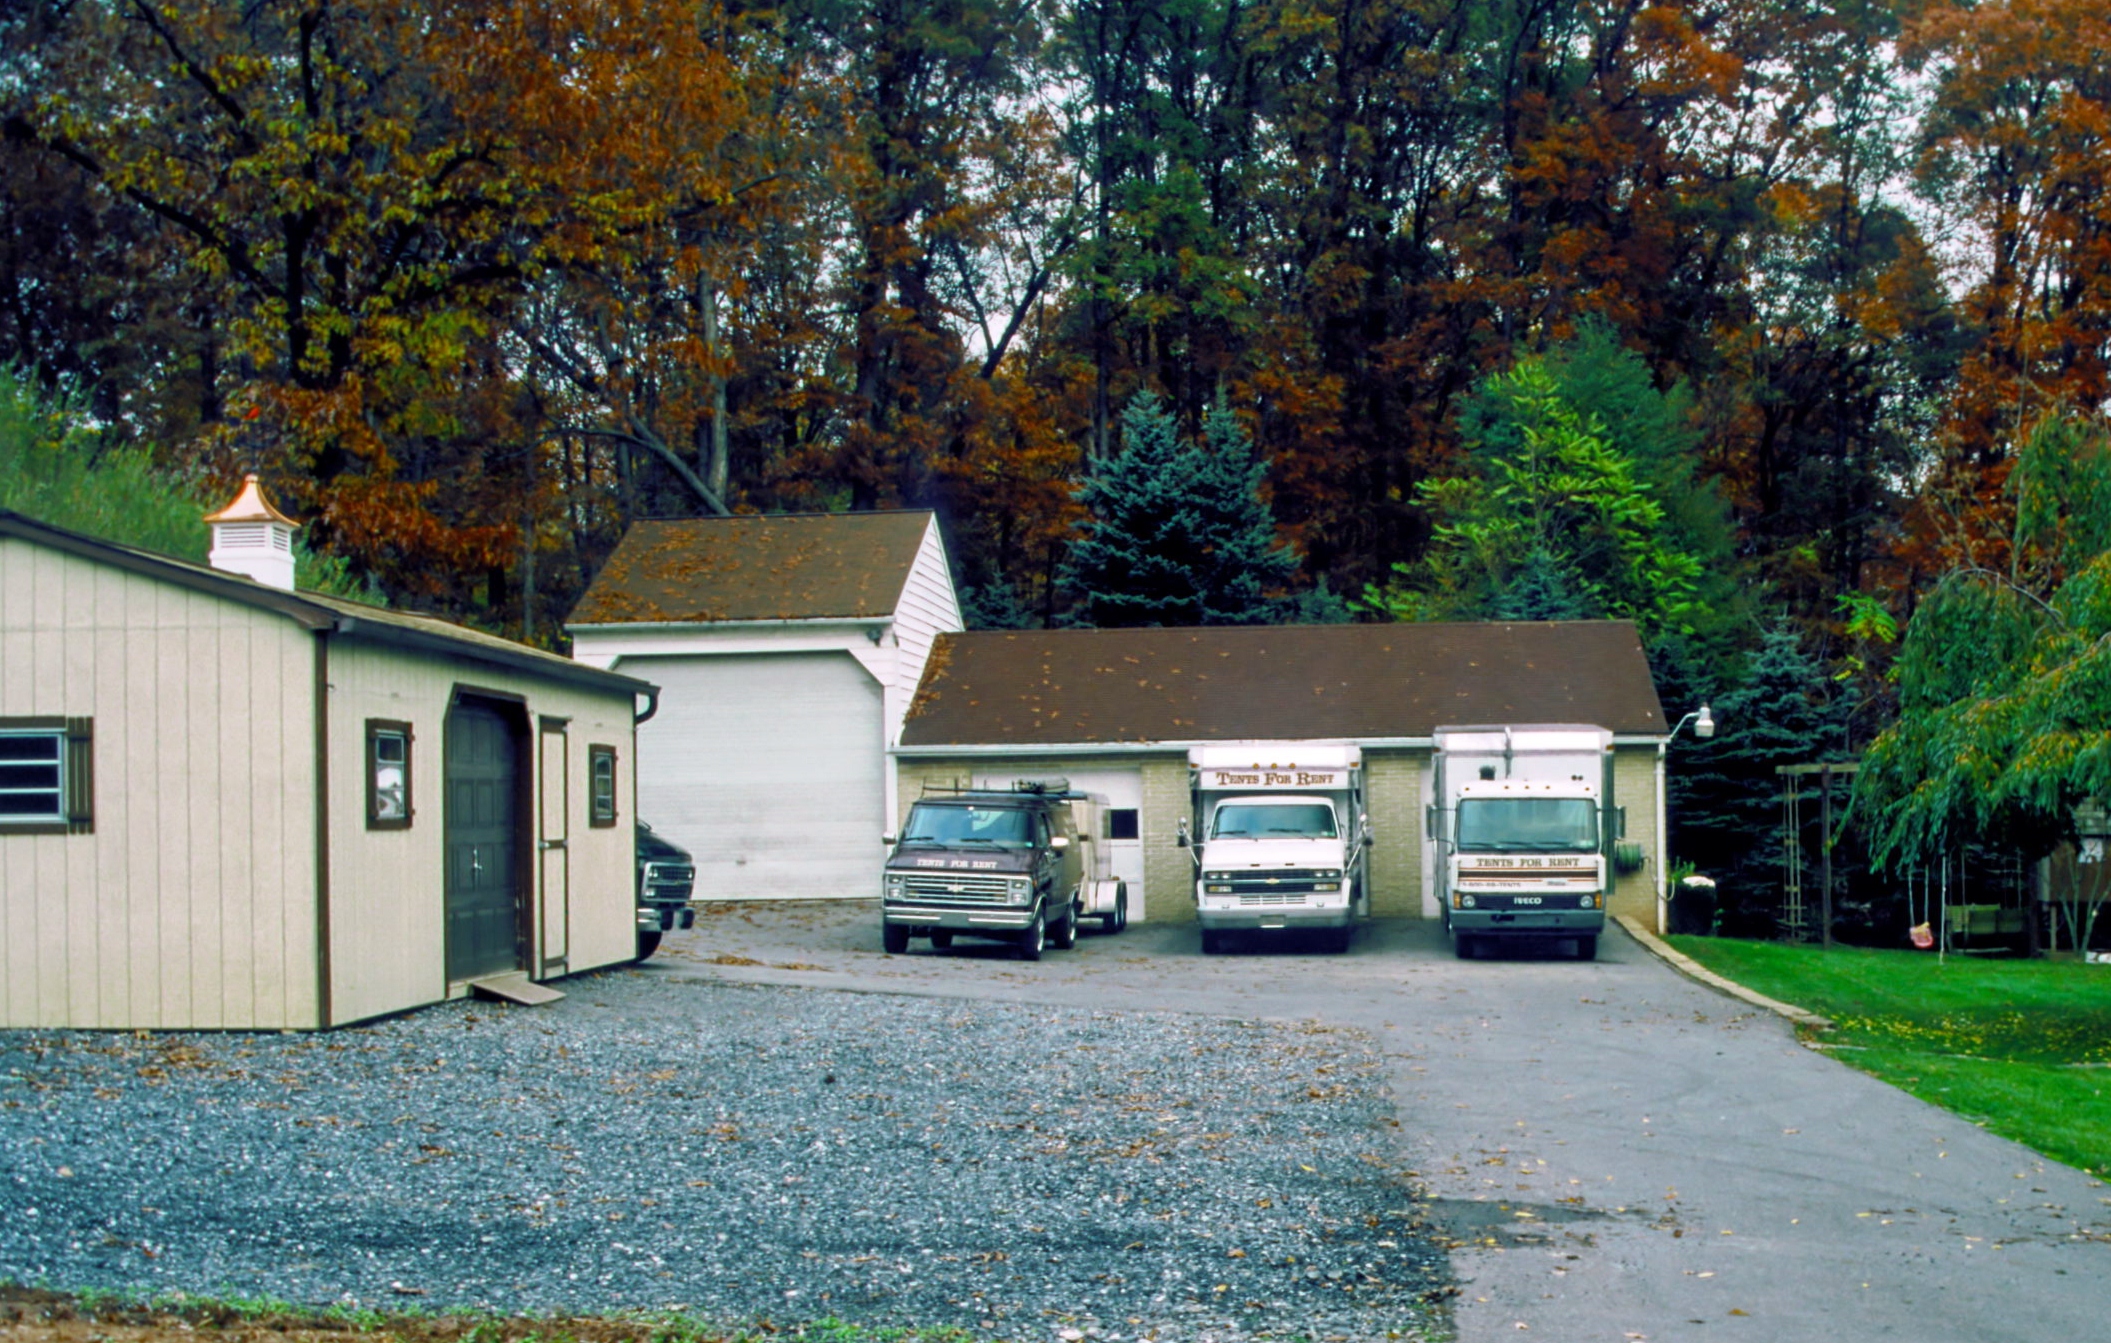  In 1985, we moved to a 3 car garage. 